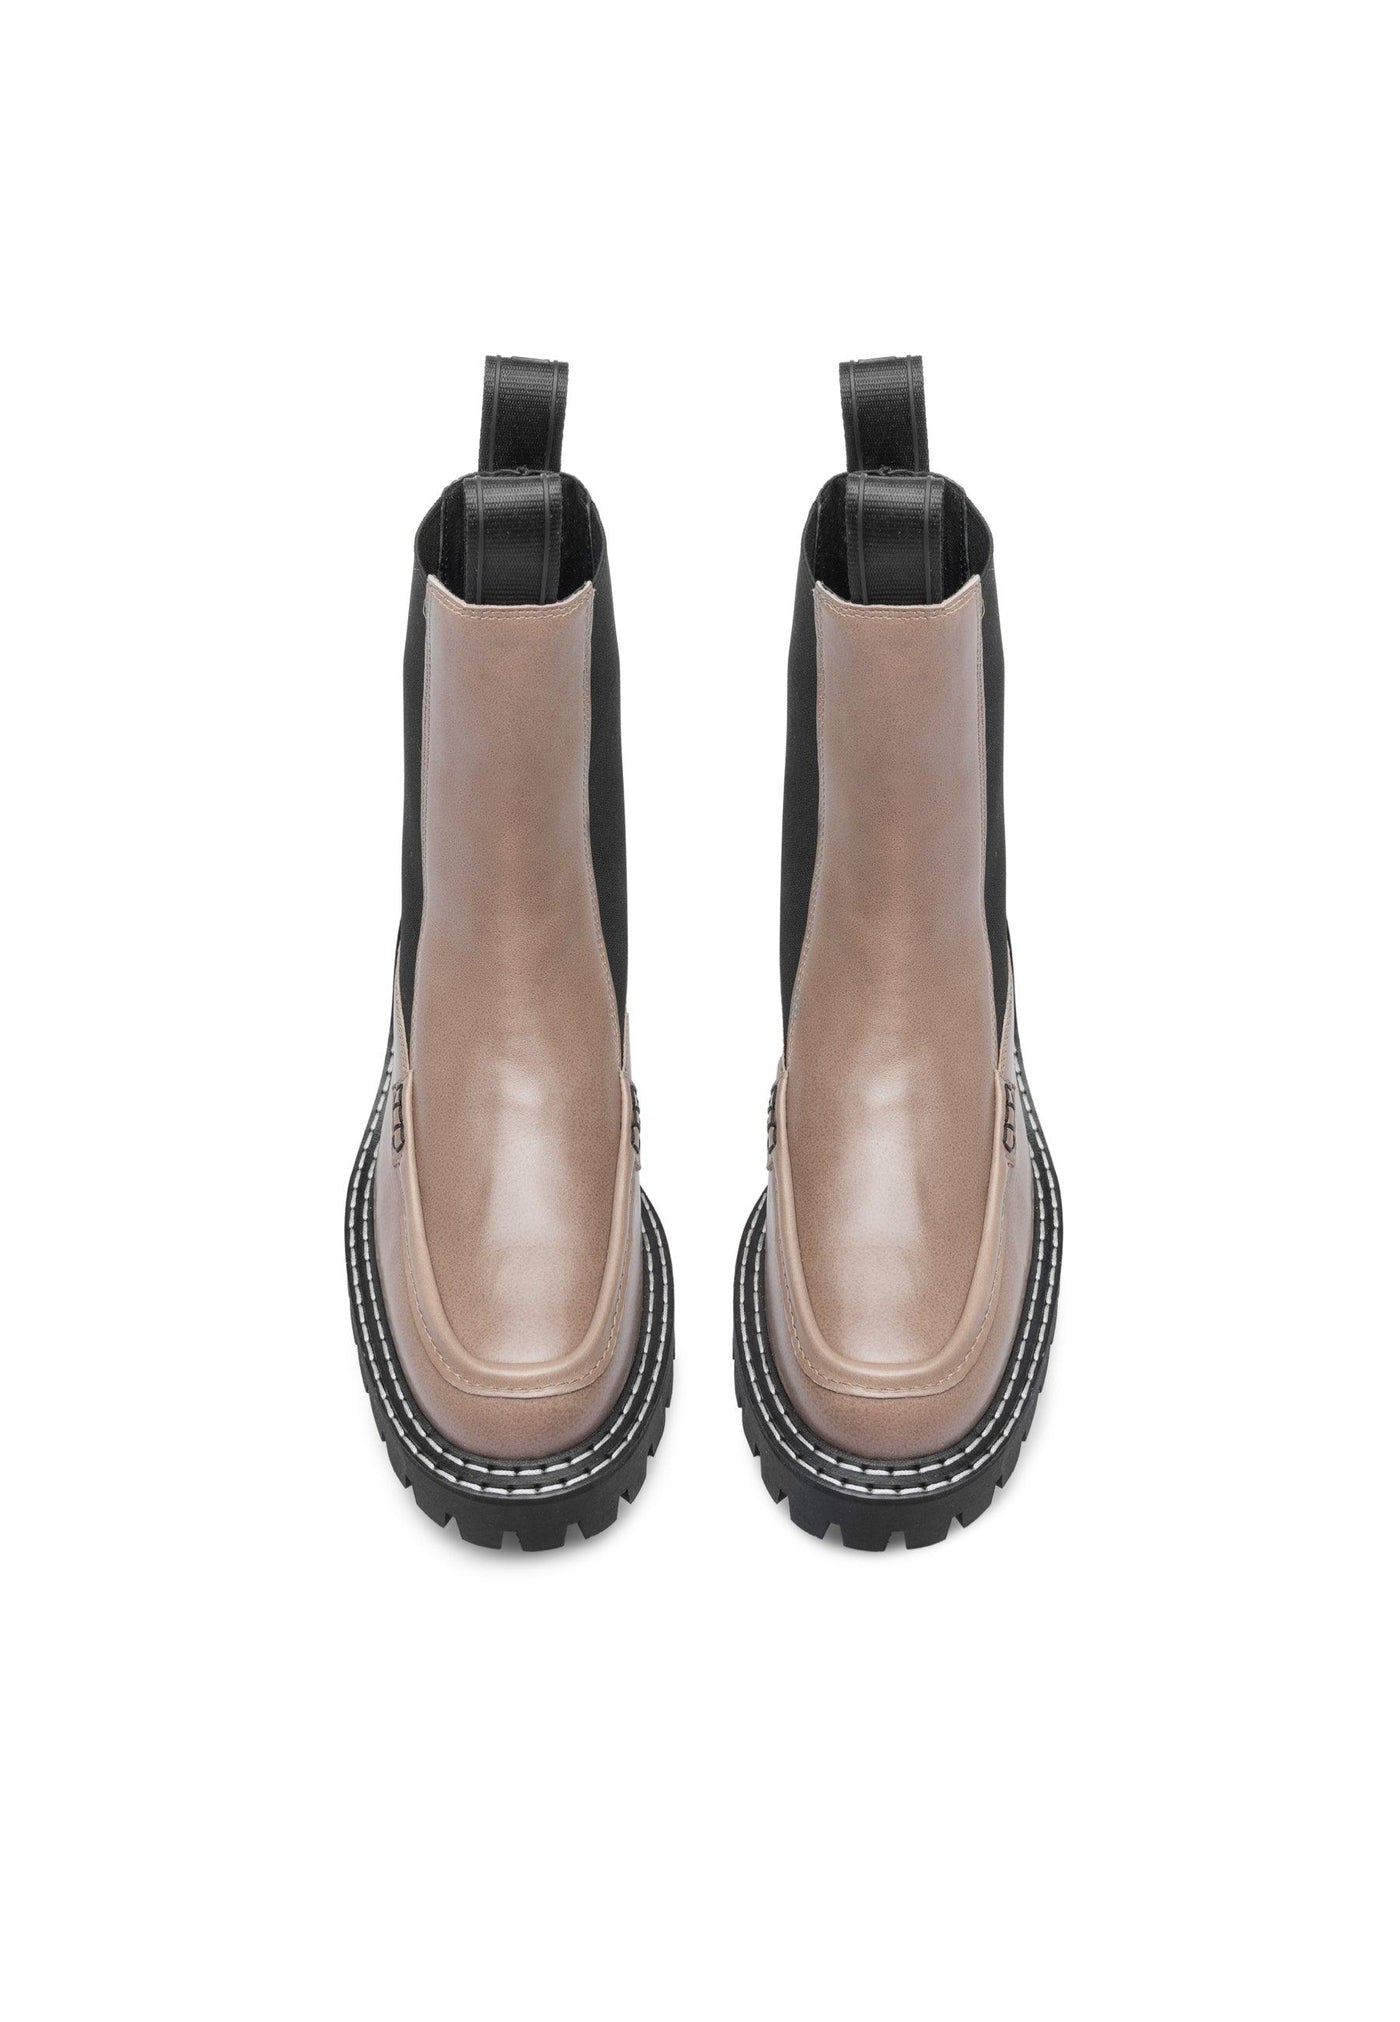 Ryder Chelsea Boot - Leather - Taupe - Taupe - LÄST